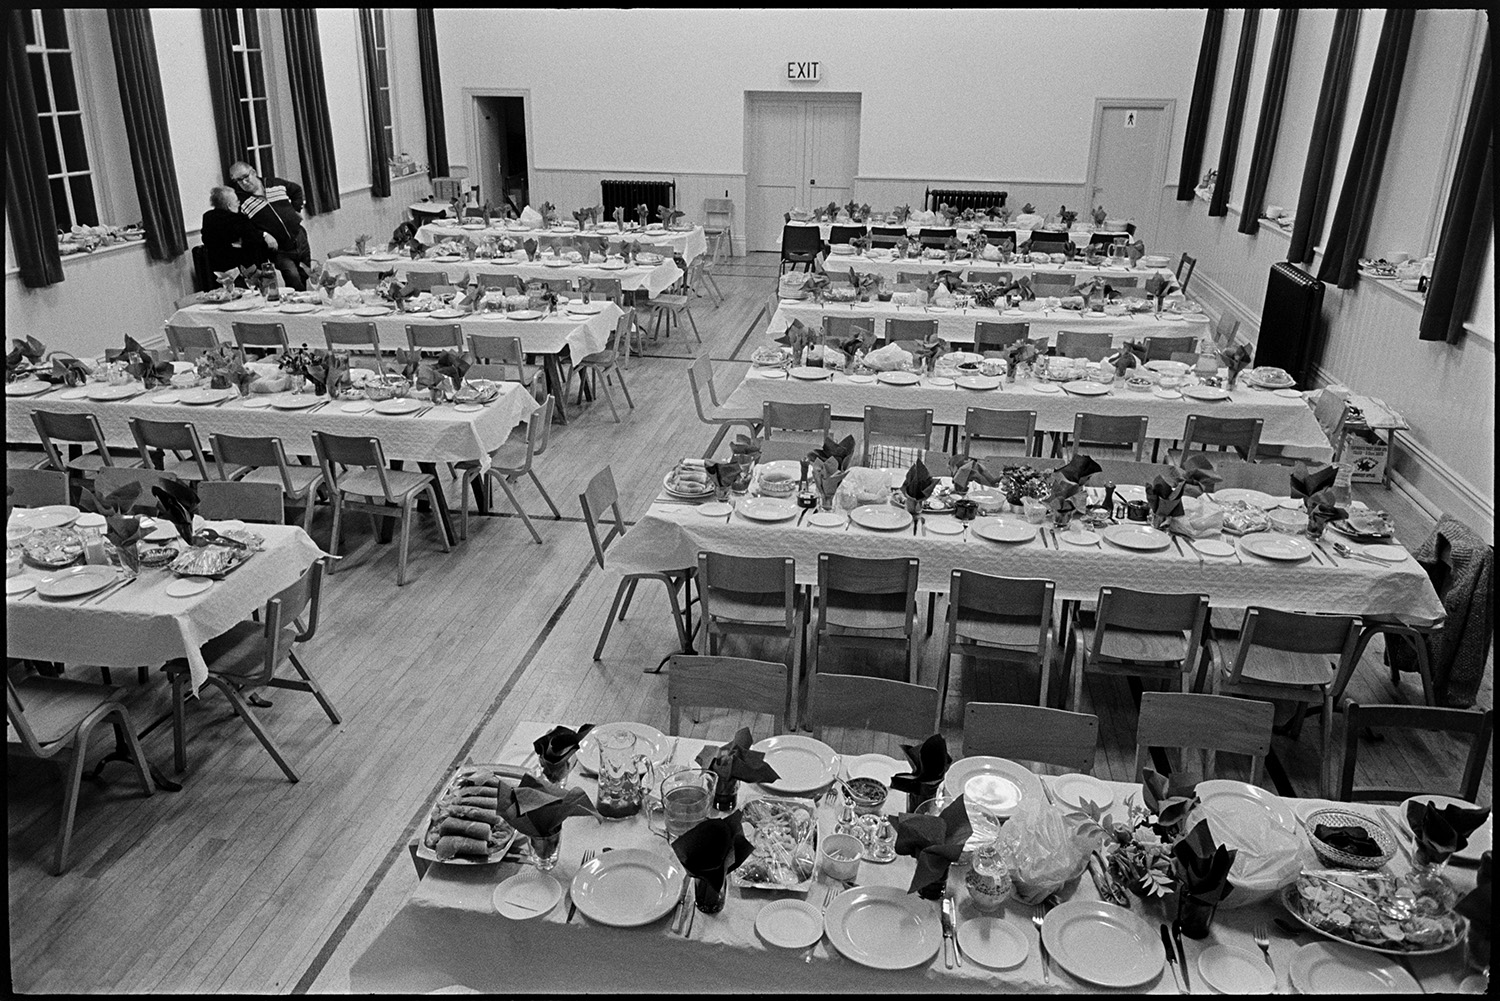 Women preparing supper, dinner in village hall, details of place settings, china, cutlery.
[Tables laid in preparation for a dinner at Winkleigh Village Hall, possibly an Over 60s Club dinner. China, cutlery, glasses, and some covered plates of food are on the tables. A man and woman are talking at the side of the hall.]